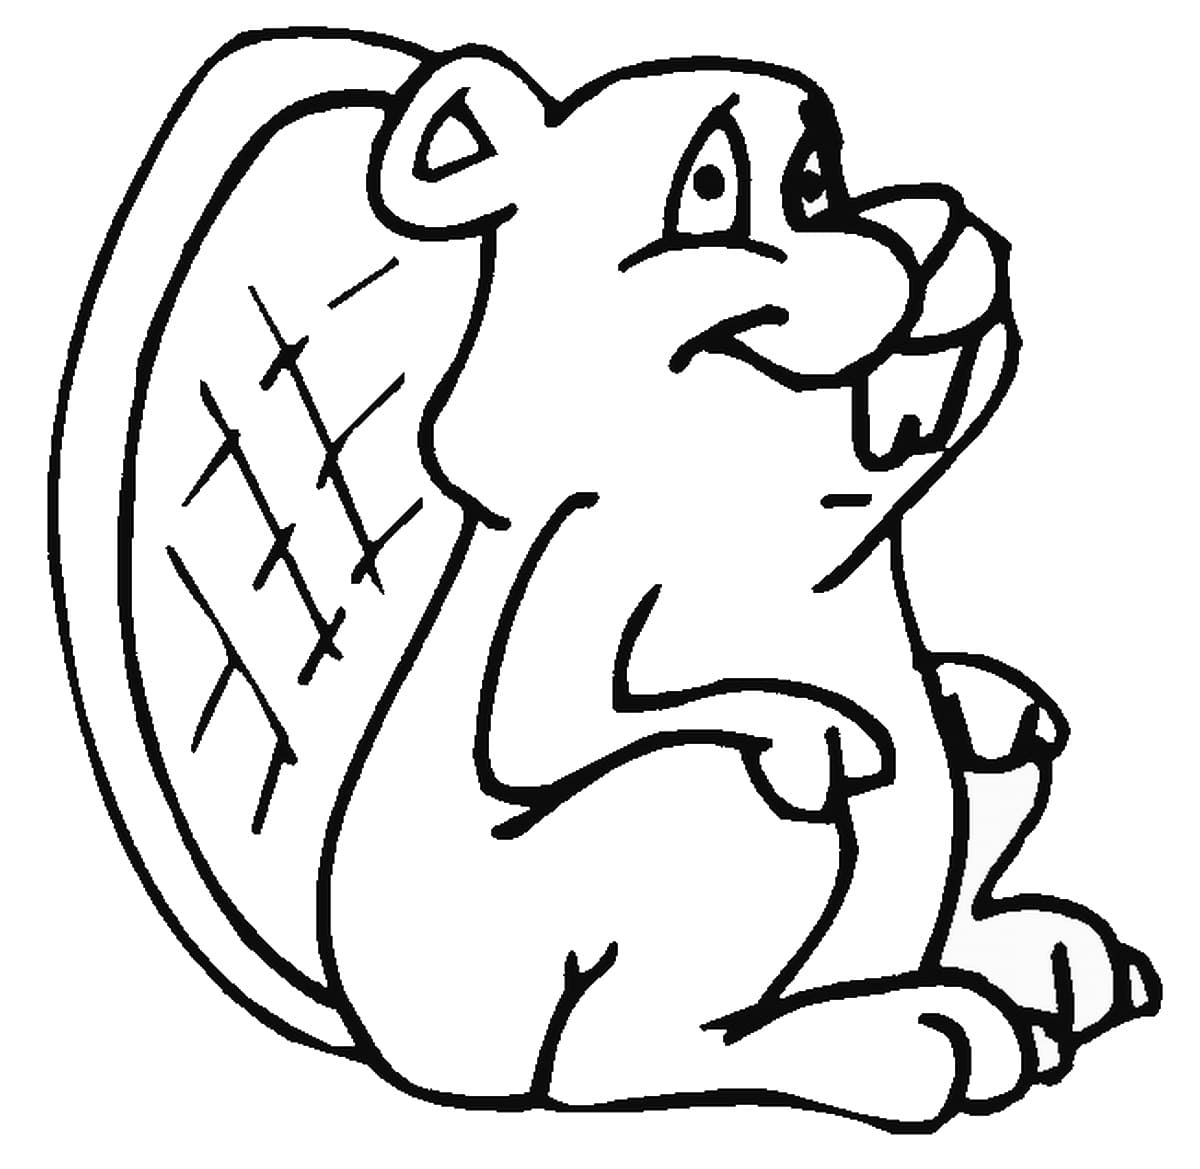 Castor Souriant coloring page